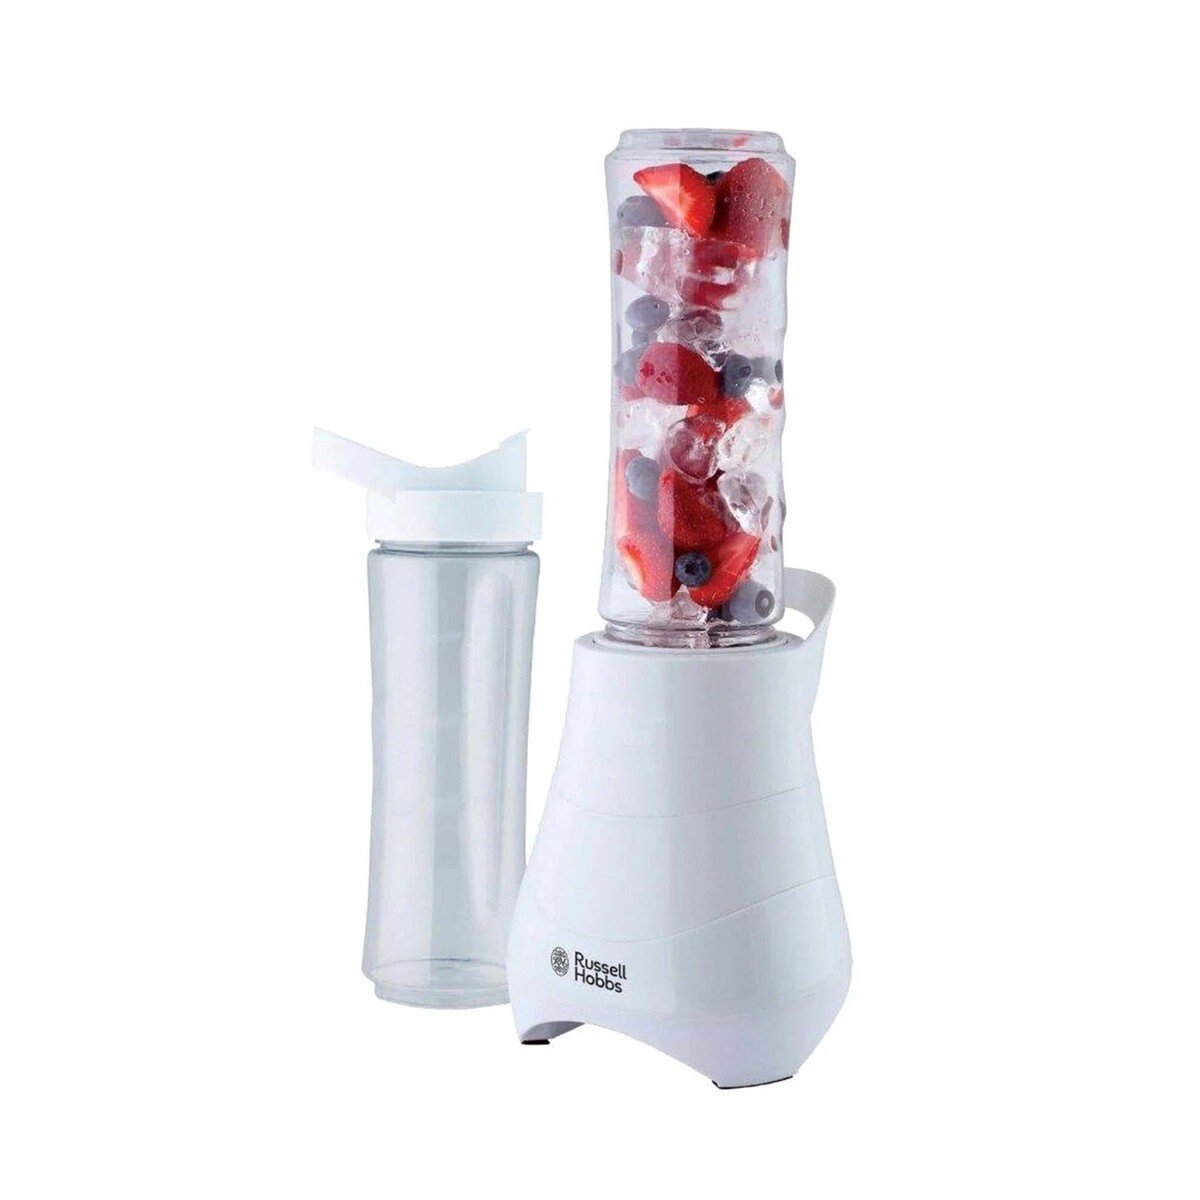 Russell Hobbs Smoothie Maker 21350